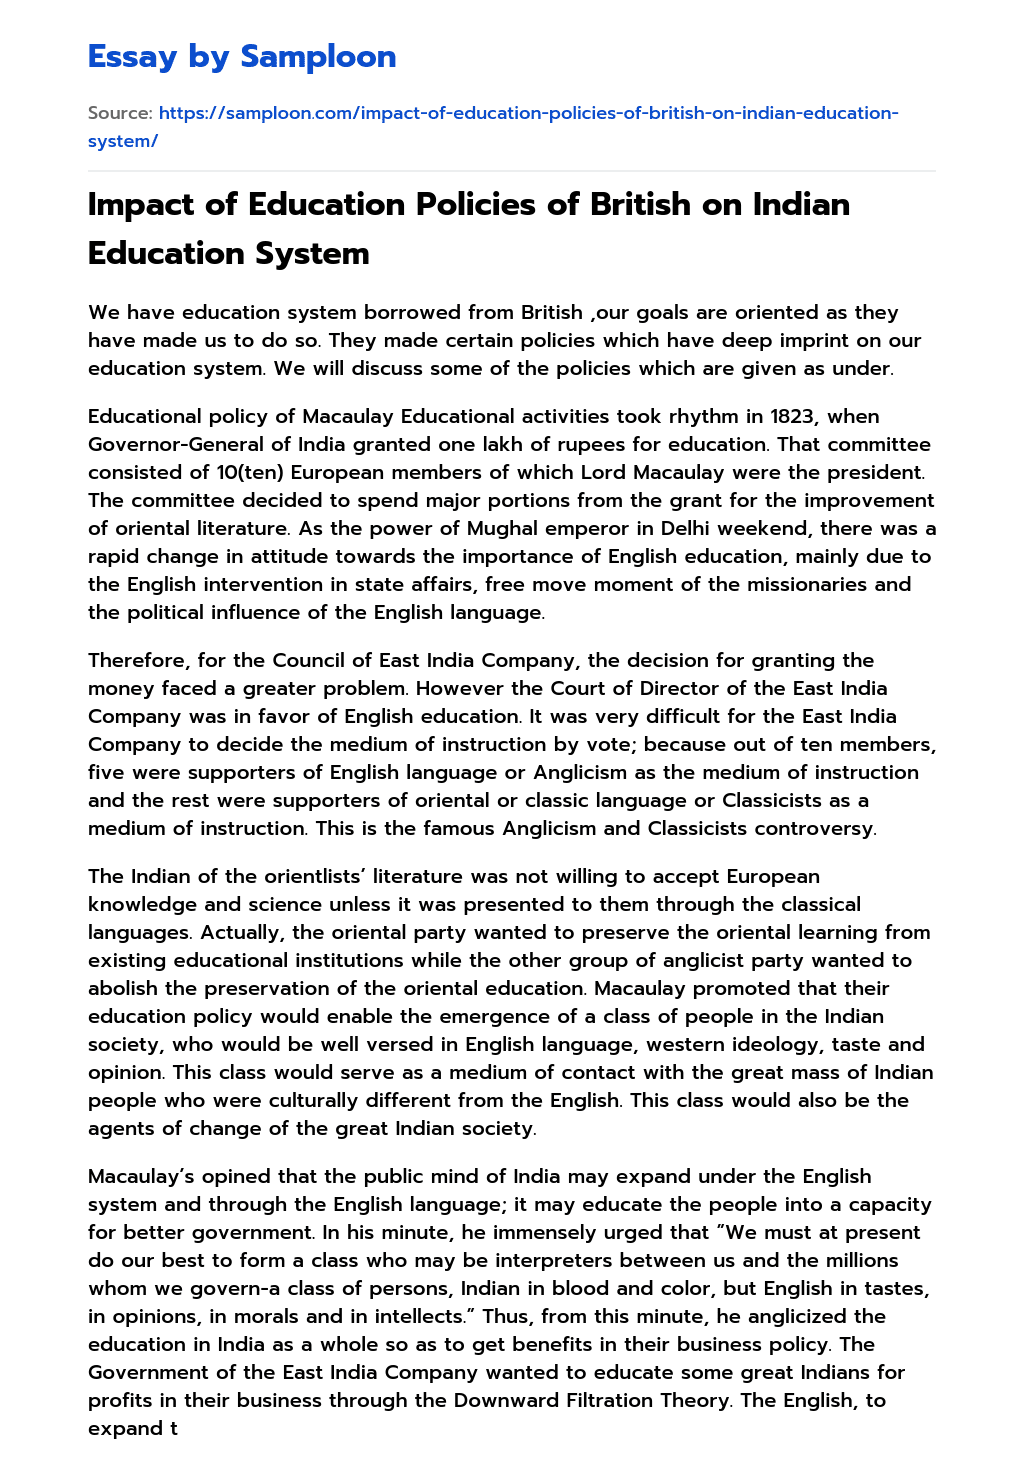 Impact of Education Policies of British on Indian Education System essay